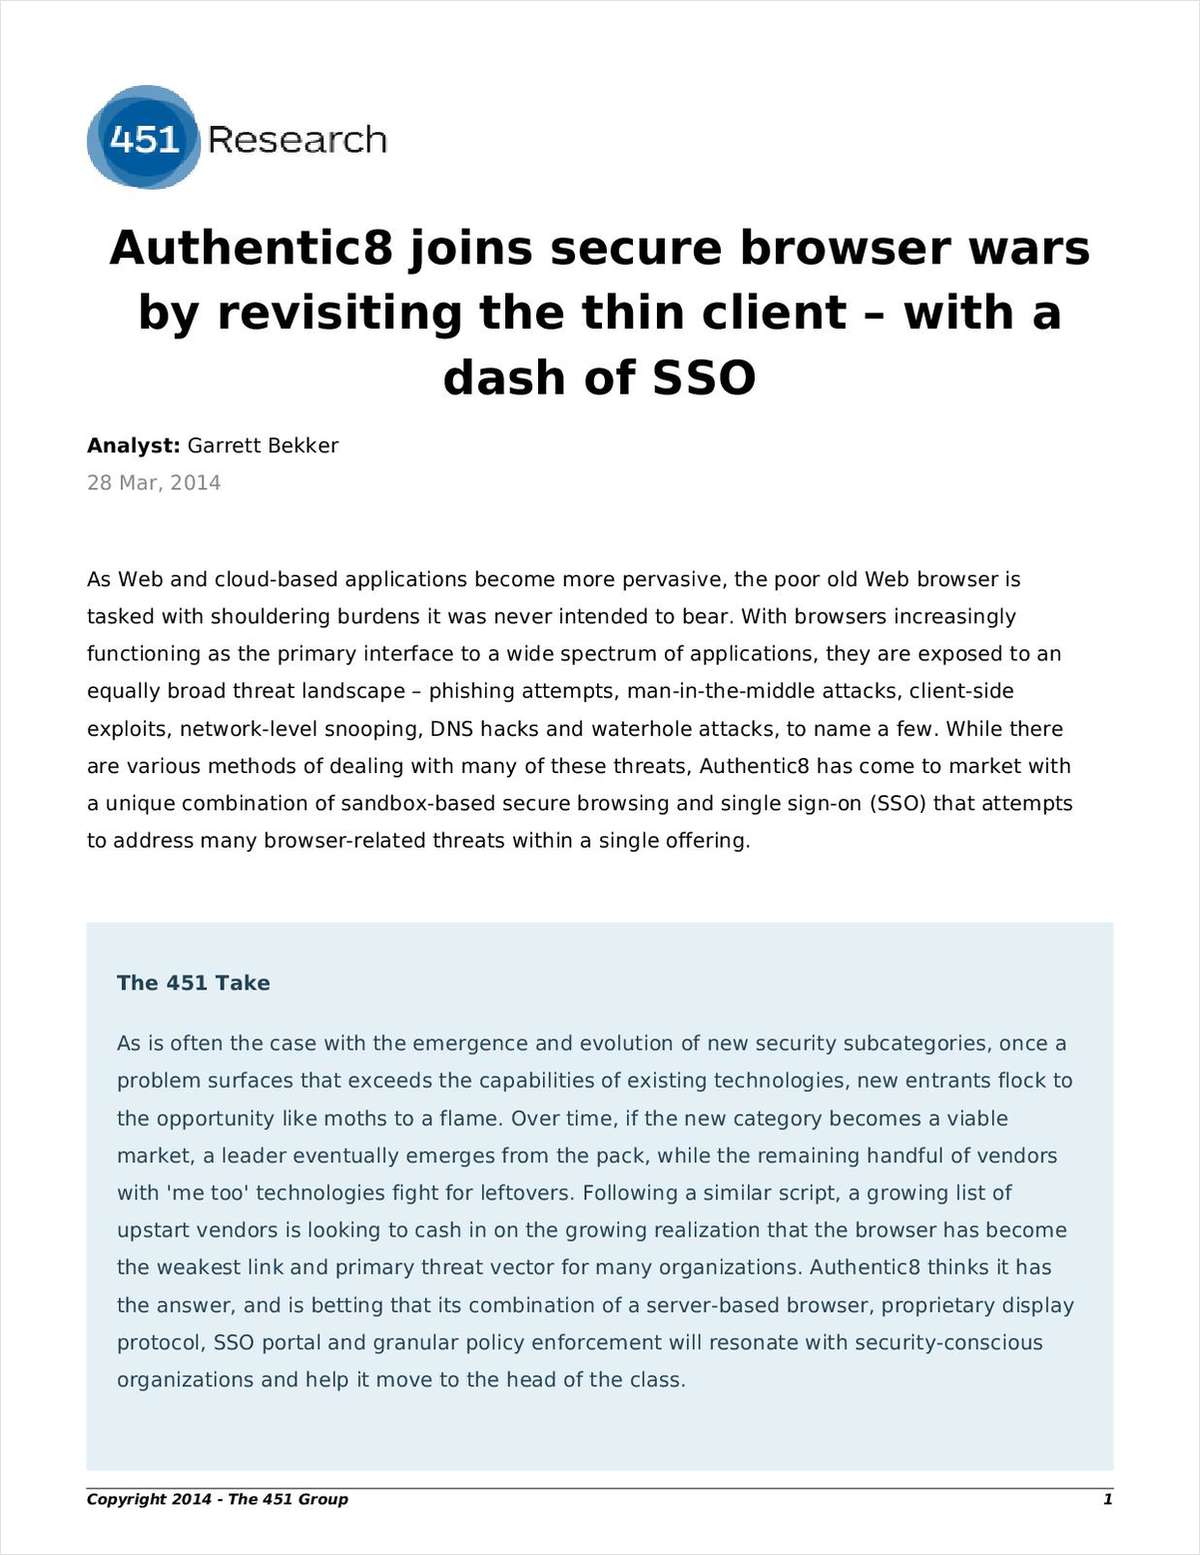 Authentic8 joins secure browser wars by revisiting the thin client -- with a dash of SSO (451 Research Impact Report)